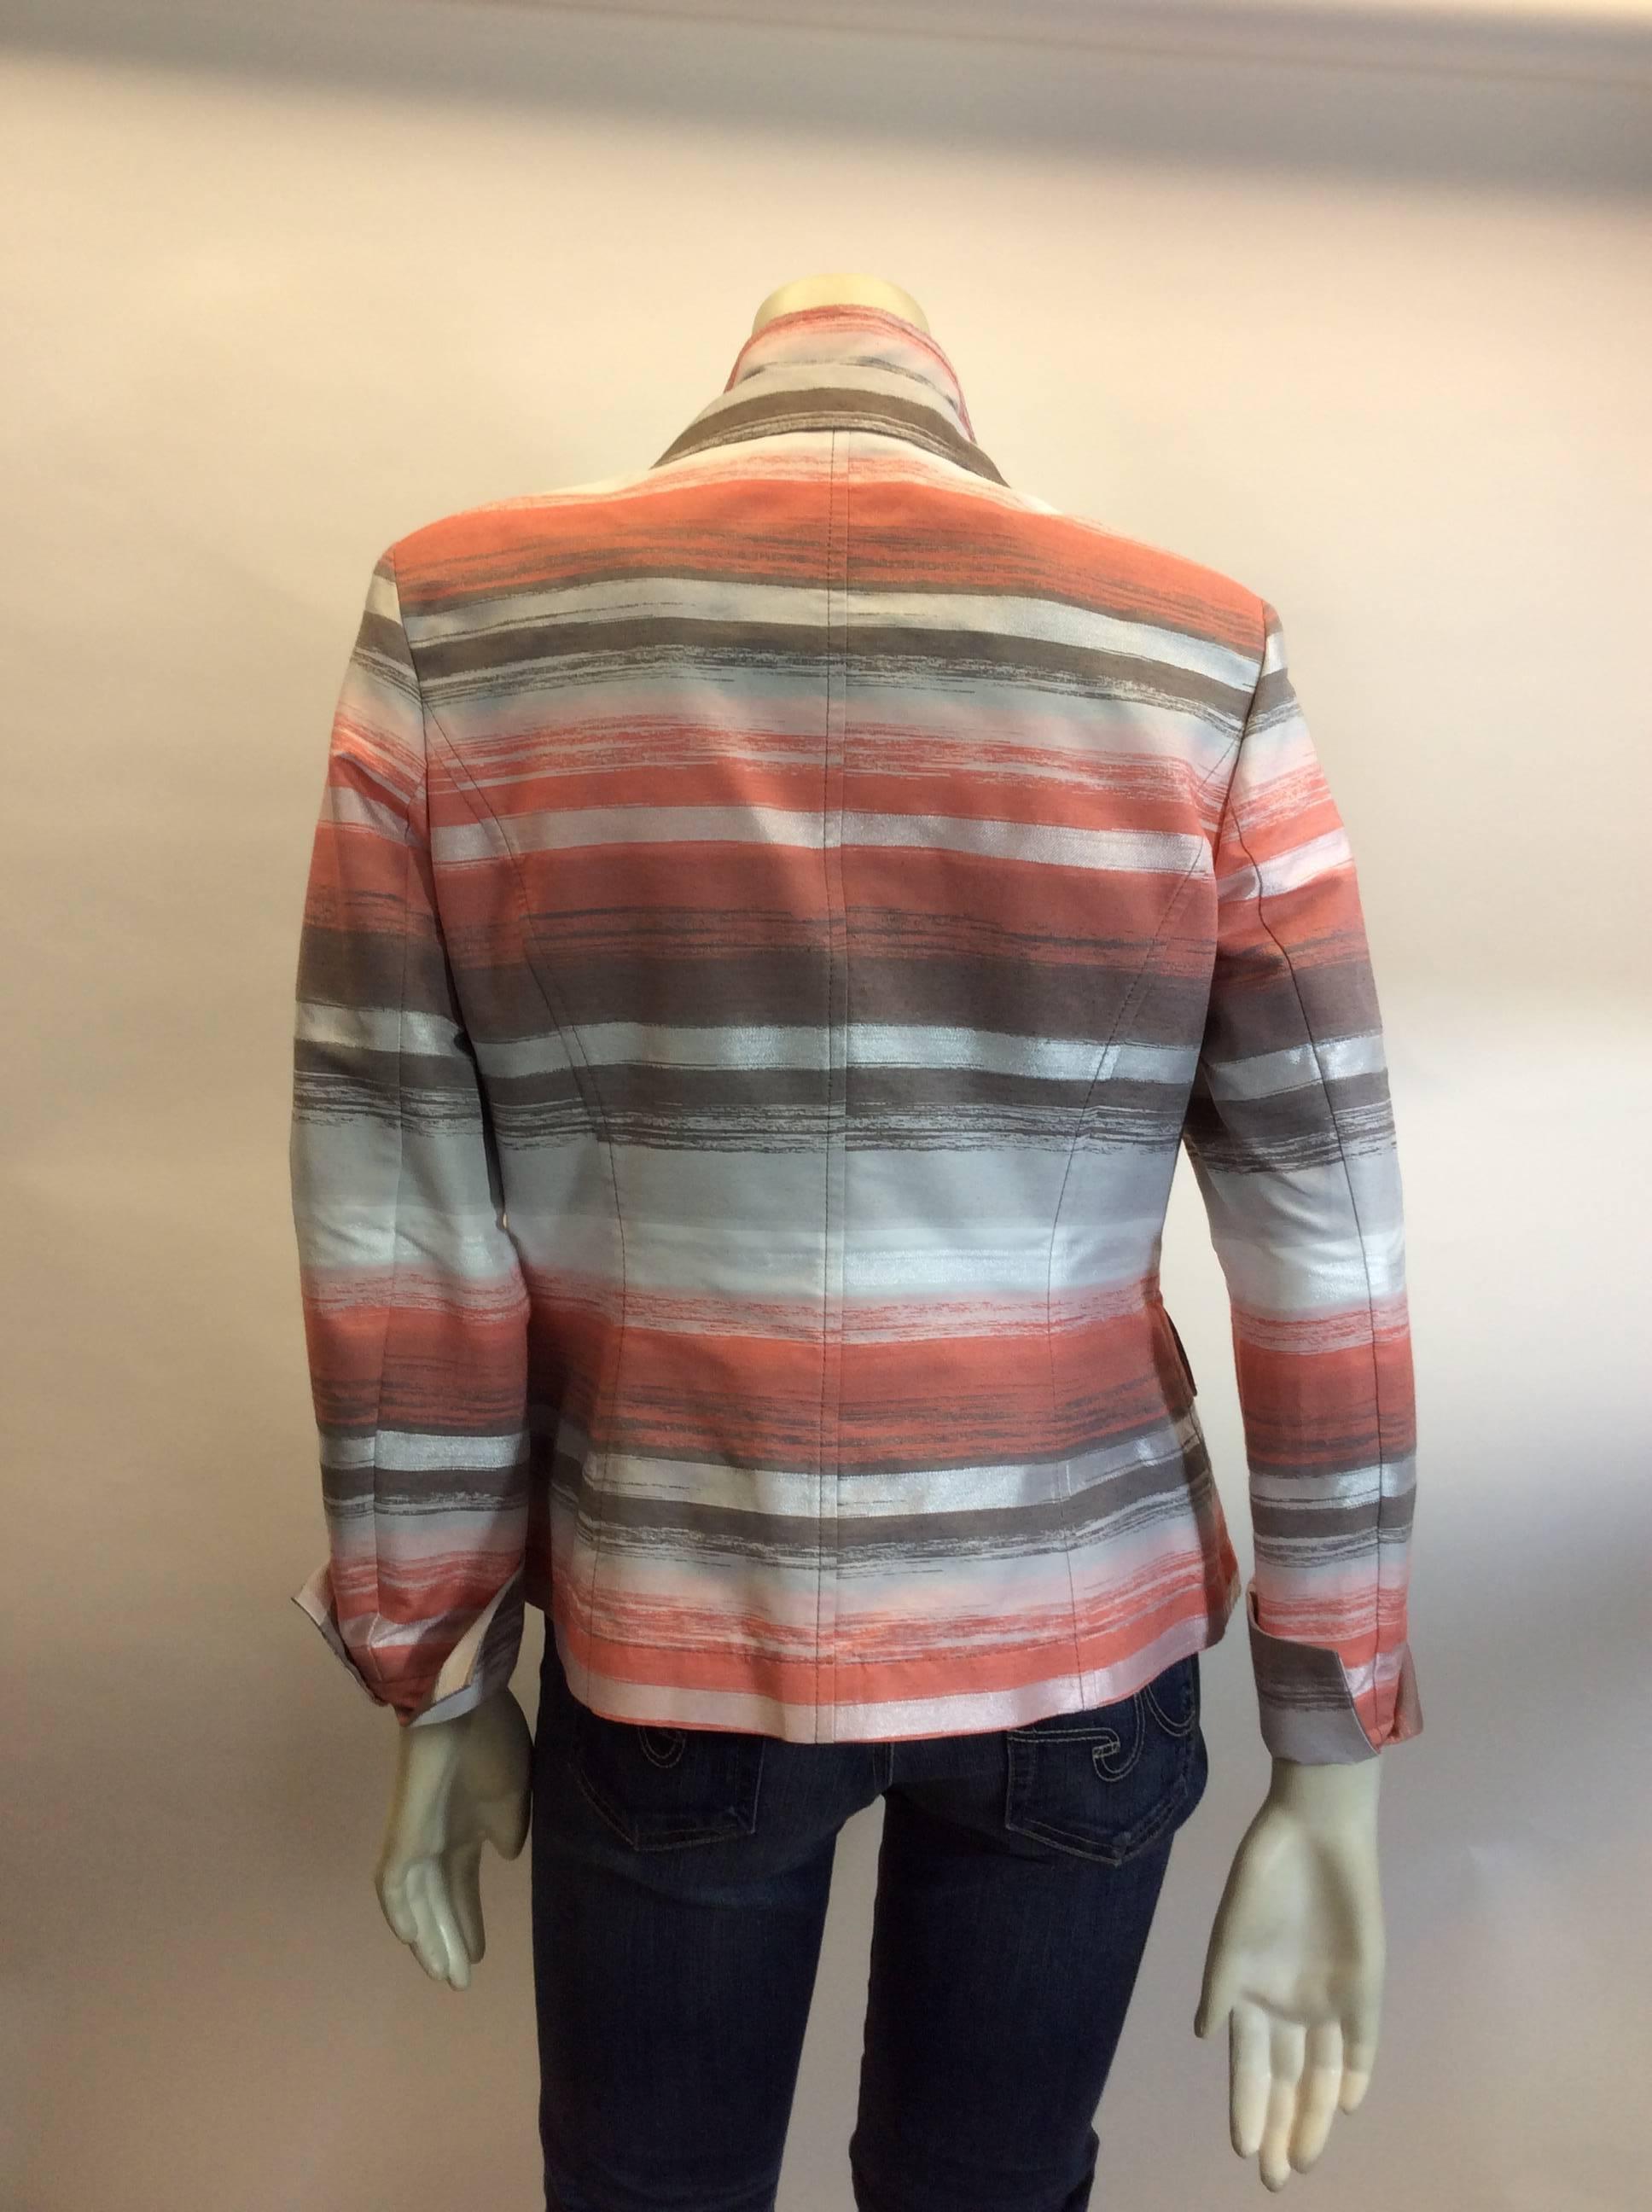 Akris Coral Stripe Double Collar Blazer In Excellent Condition For Sale In Narberth, PA